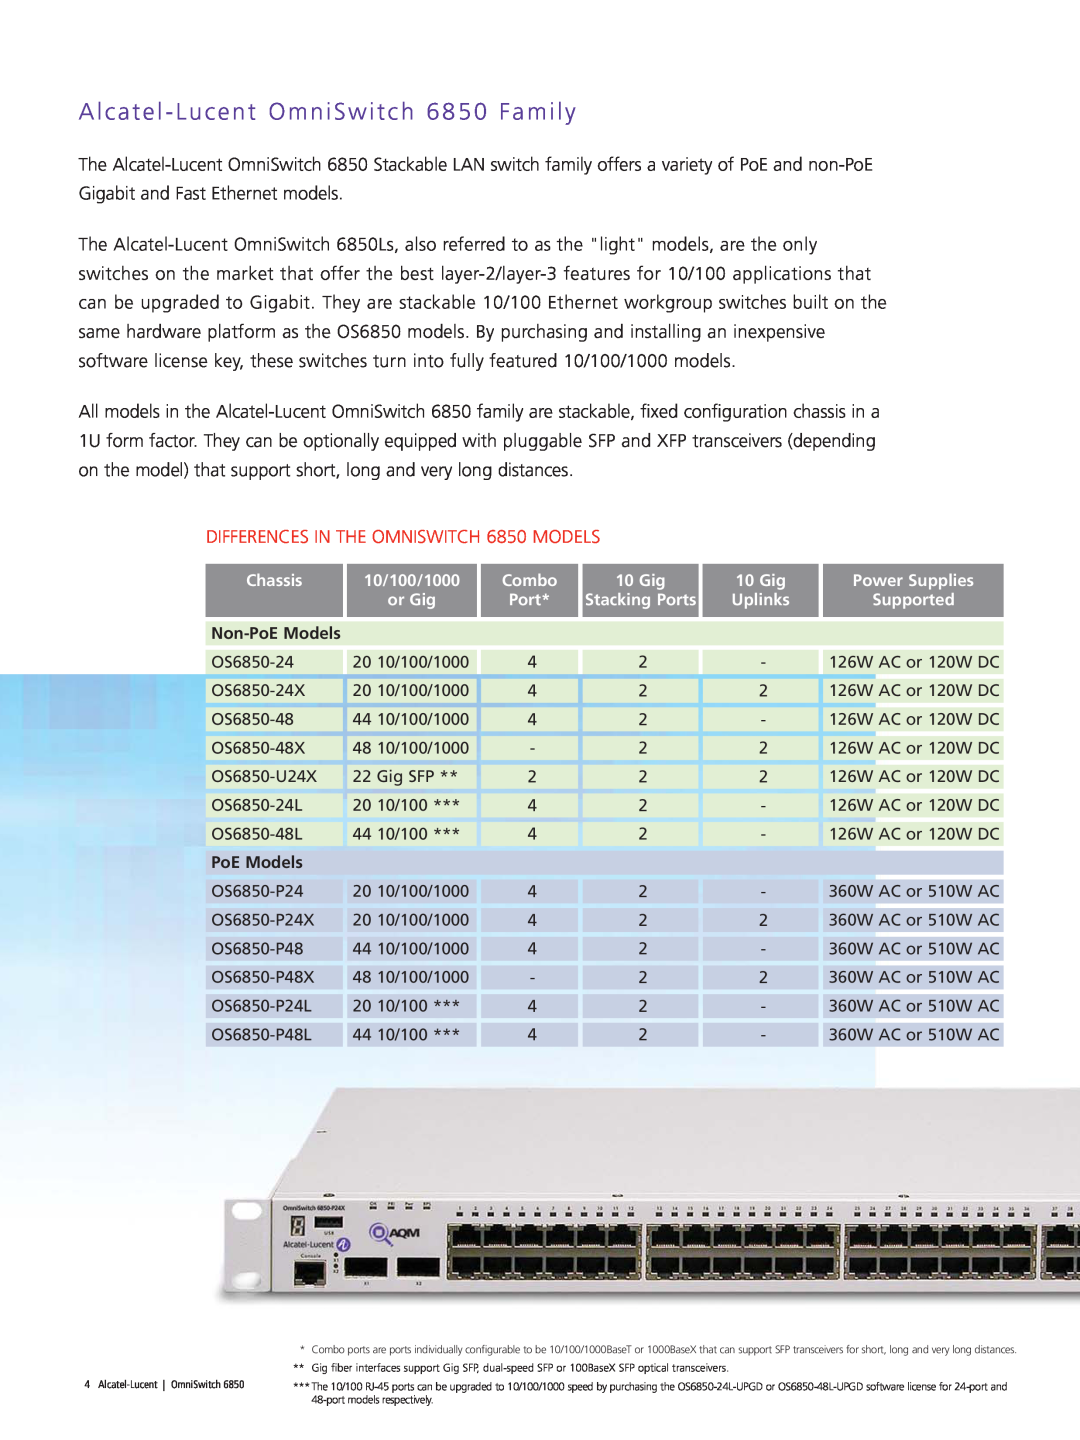 Riverstone Networks manual Alcatel - Lucent OmniSwitch 6850 Family, DIFFERENCES IN THE OMNISWITCH 6850 MODELS 